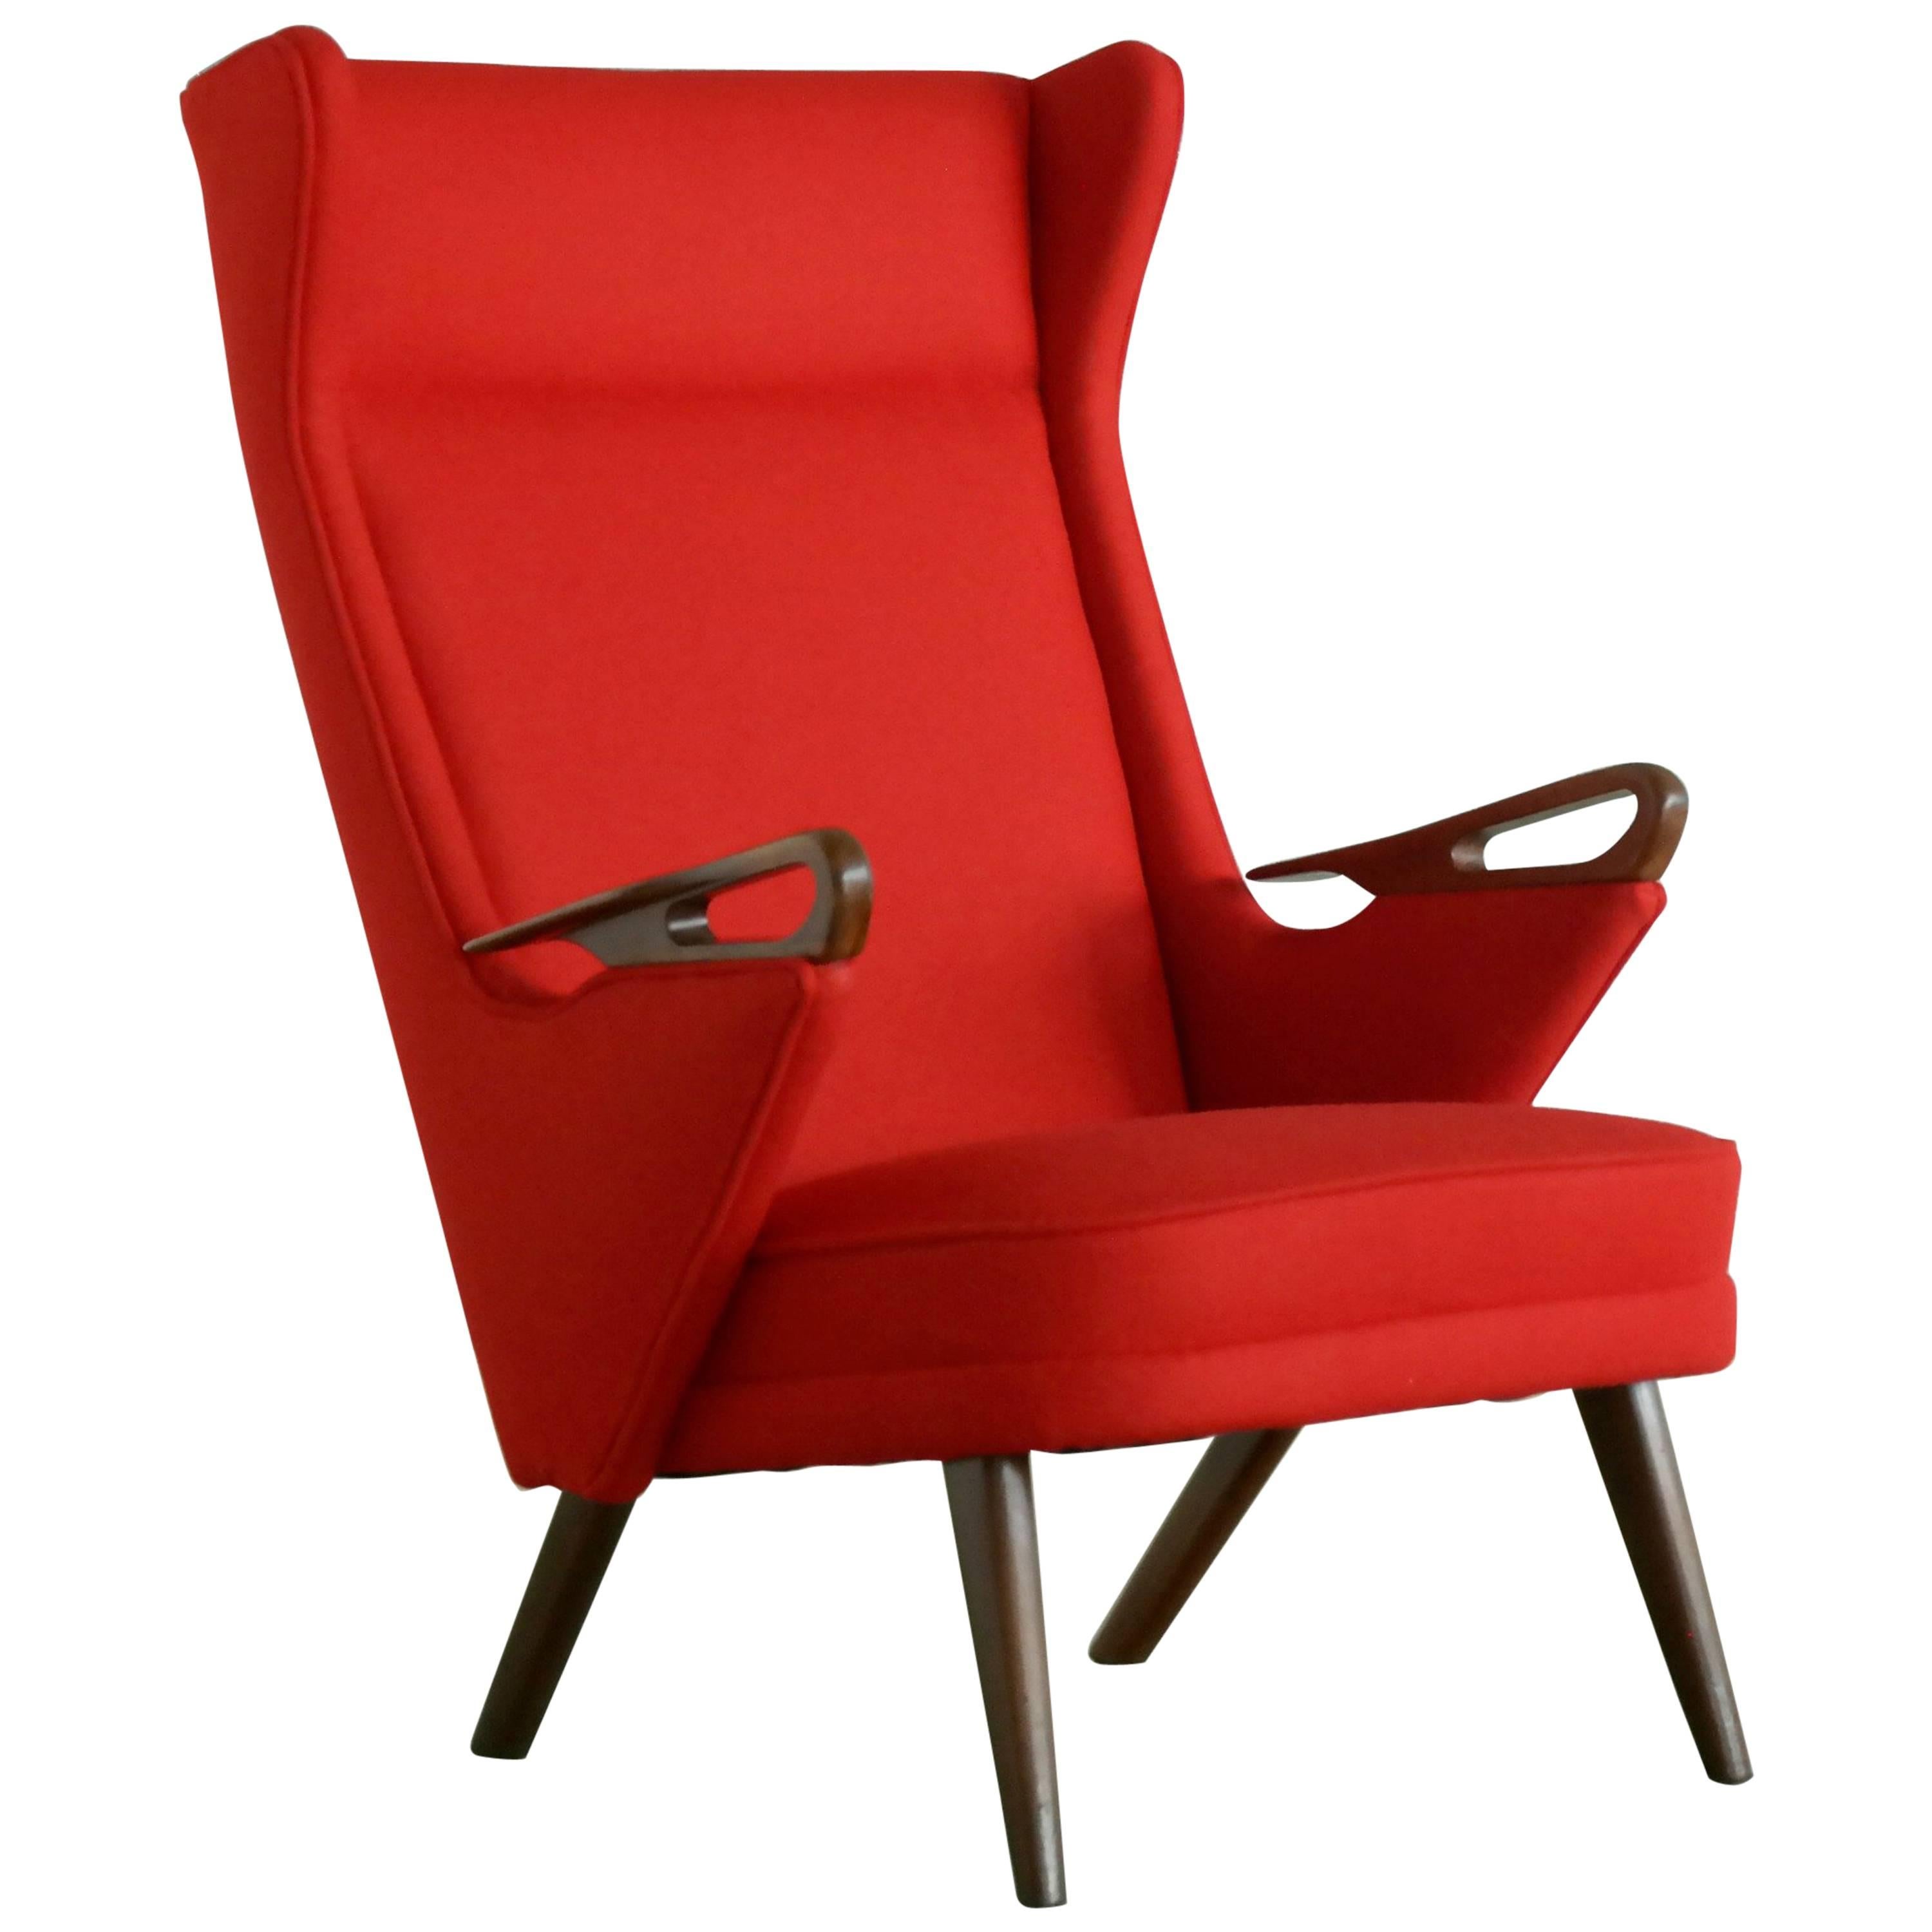 Danish Midcentury Highback Lounge Chair with Teak Armrests and Ferrari Red Wool